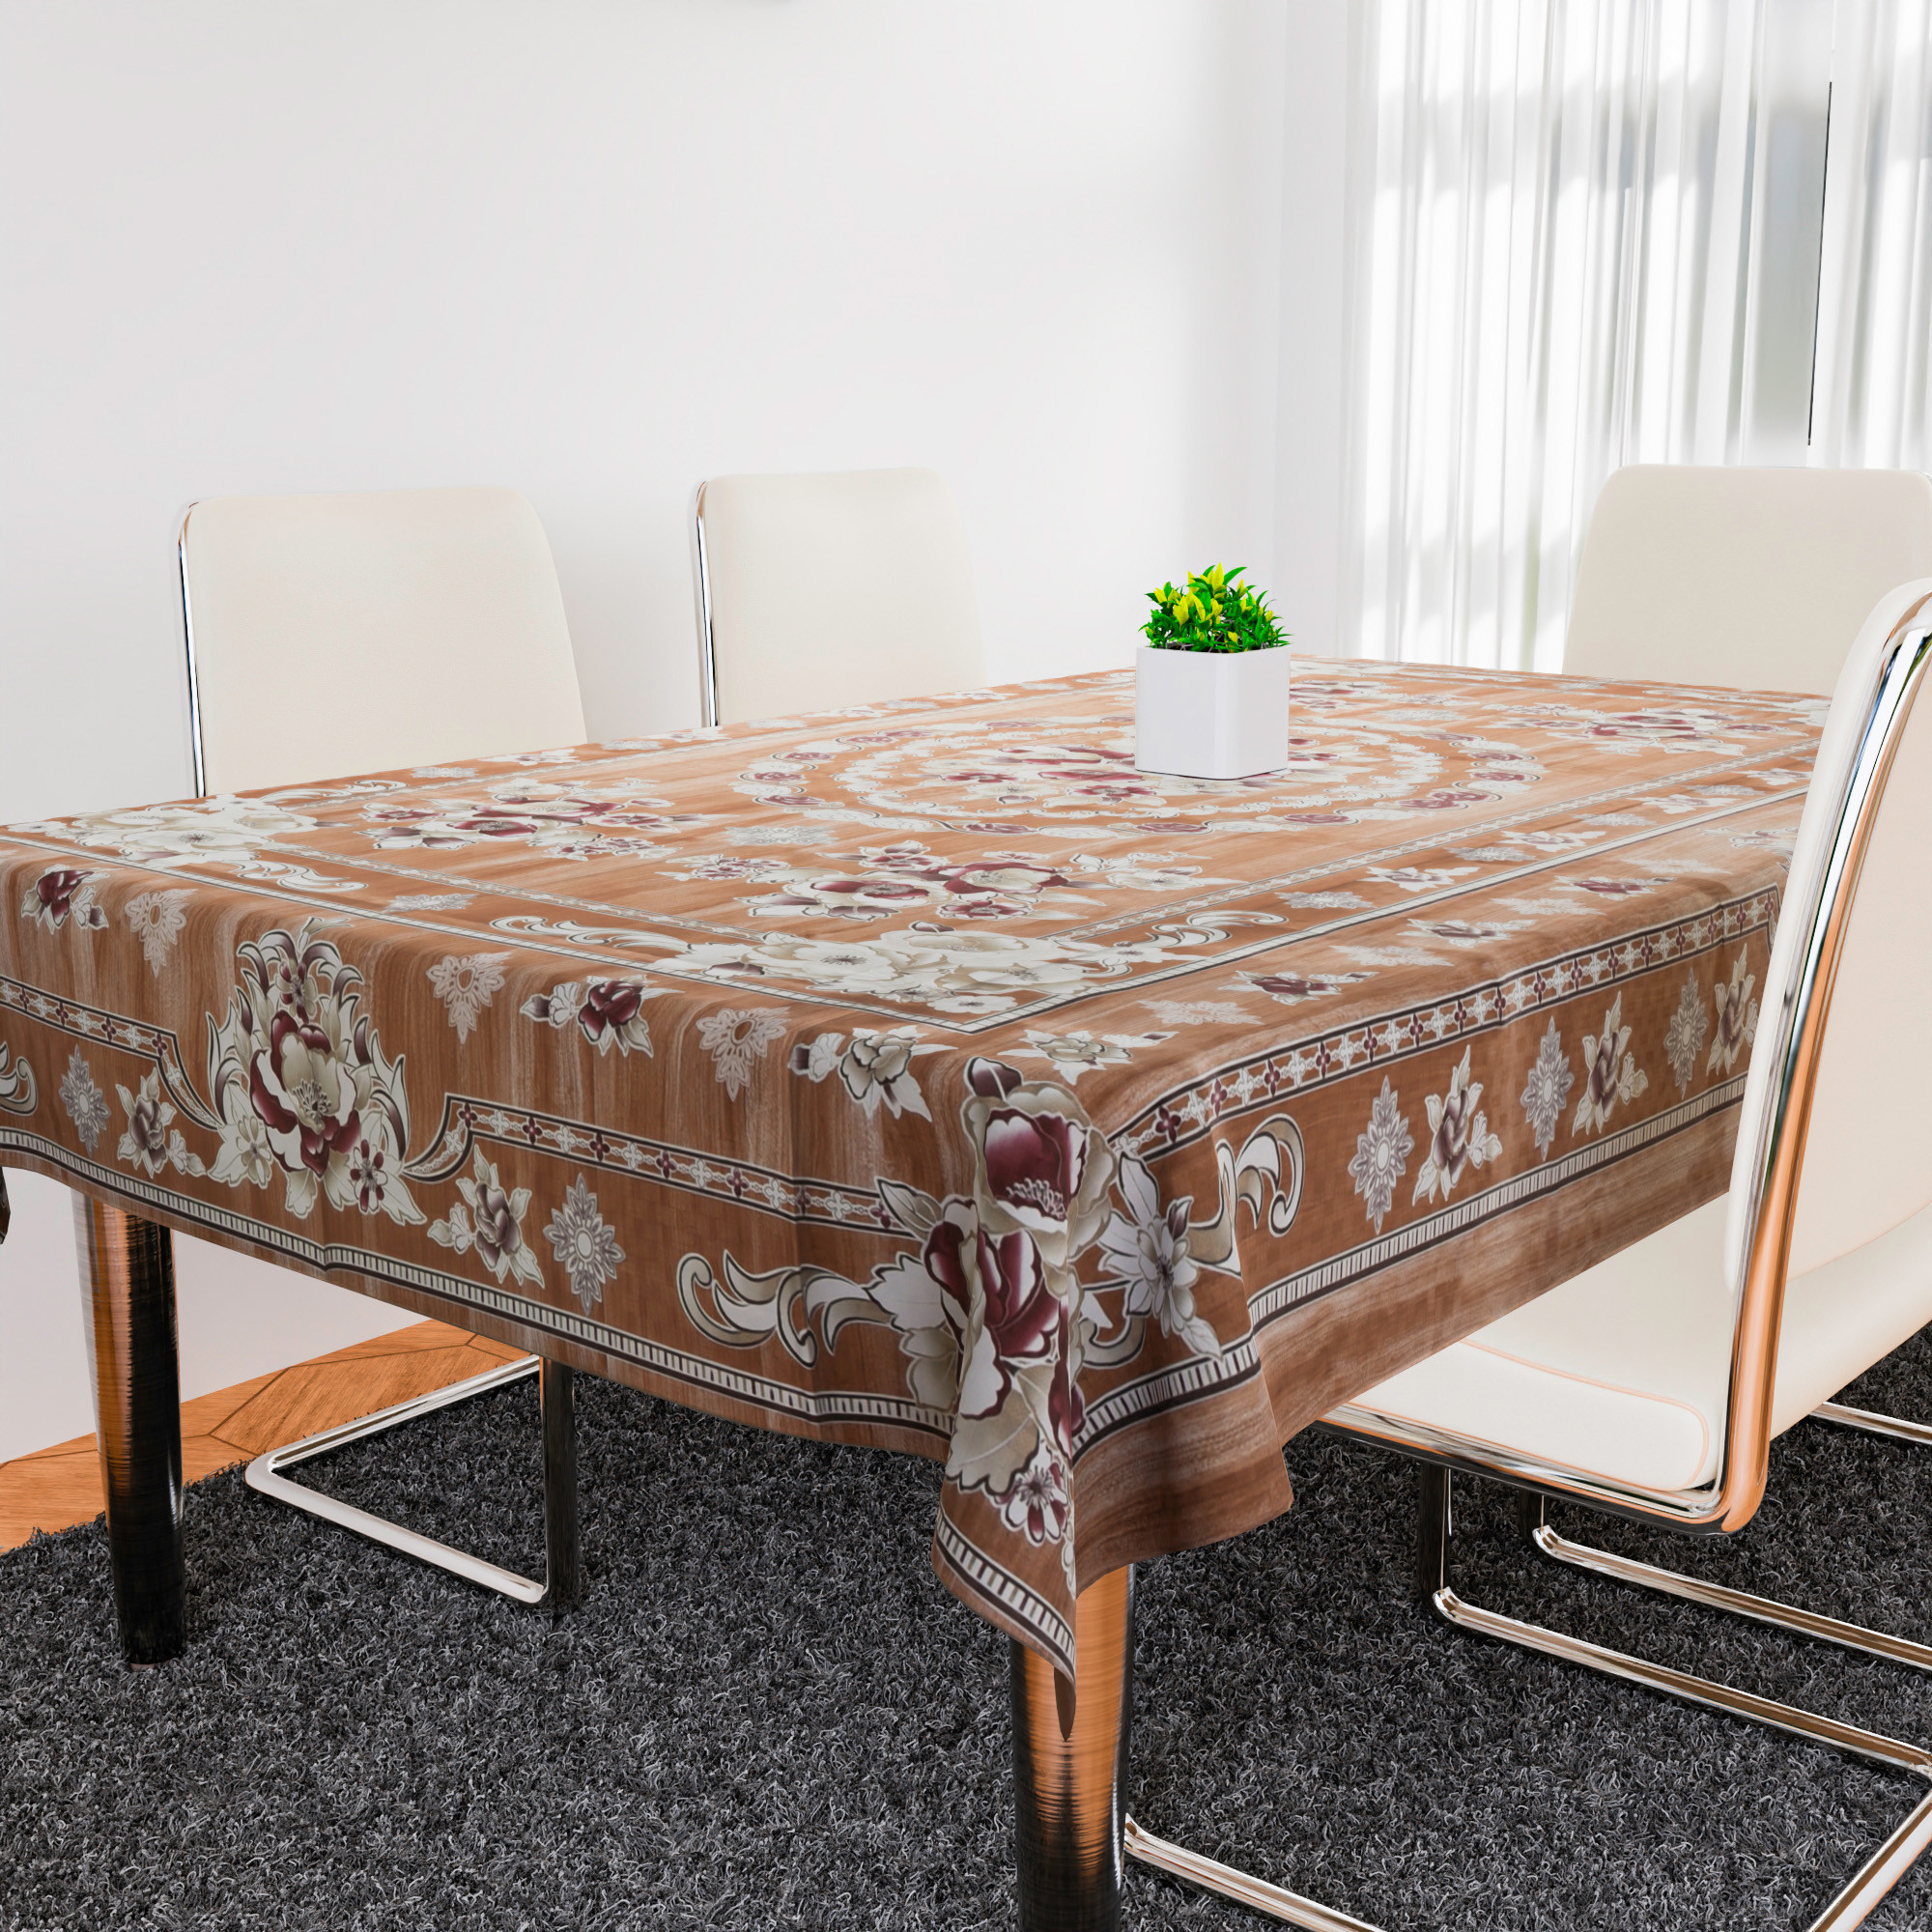 Kuber Industries Dining Table Cover | PVC Table Cloth Cover | 6 Seater Table Cloth | Table Protector | Table Cover for Dining Table | Passion Flower | 60x90 Inch | DTC | Golden